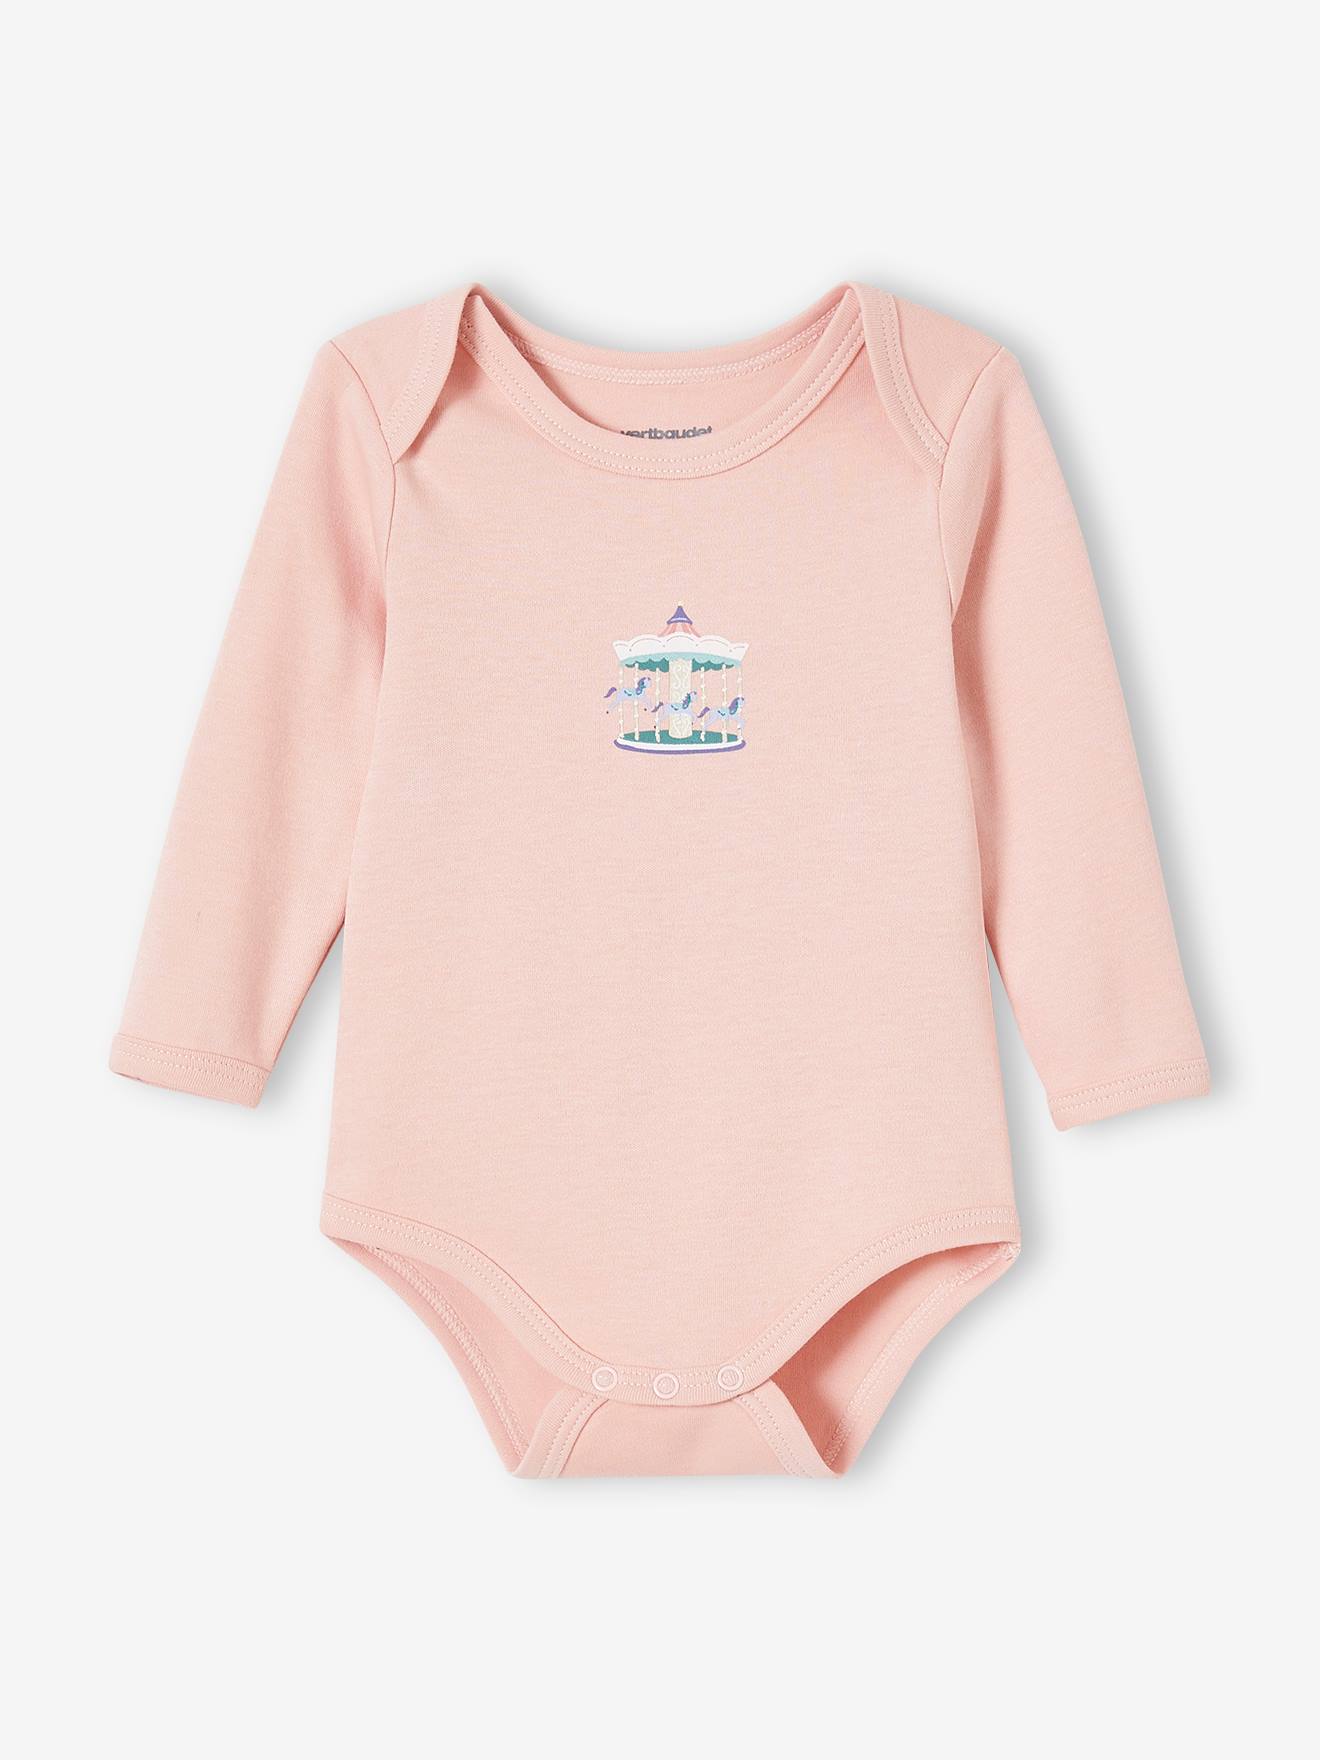 Pack of 5 Long Sleeve Bodysuits with Cutaway Shoulders, for Babies - pink  light 2 color/multicol r